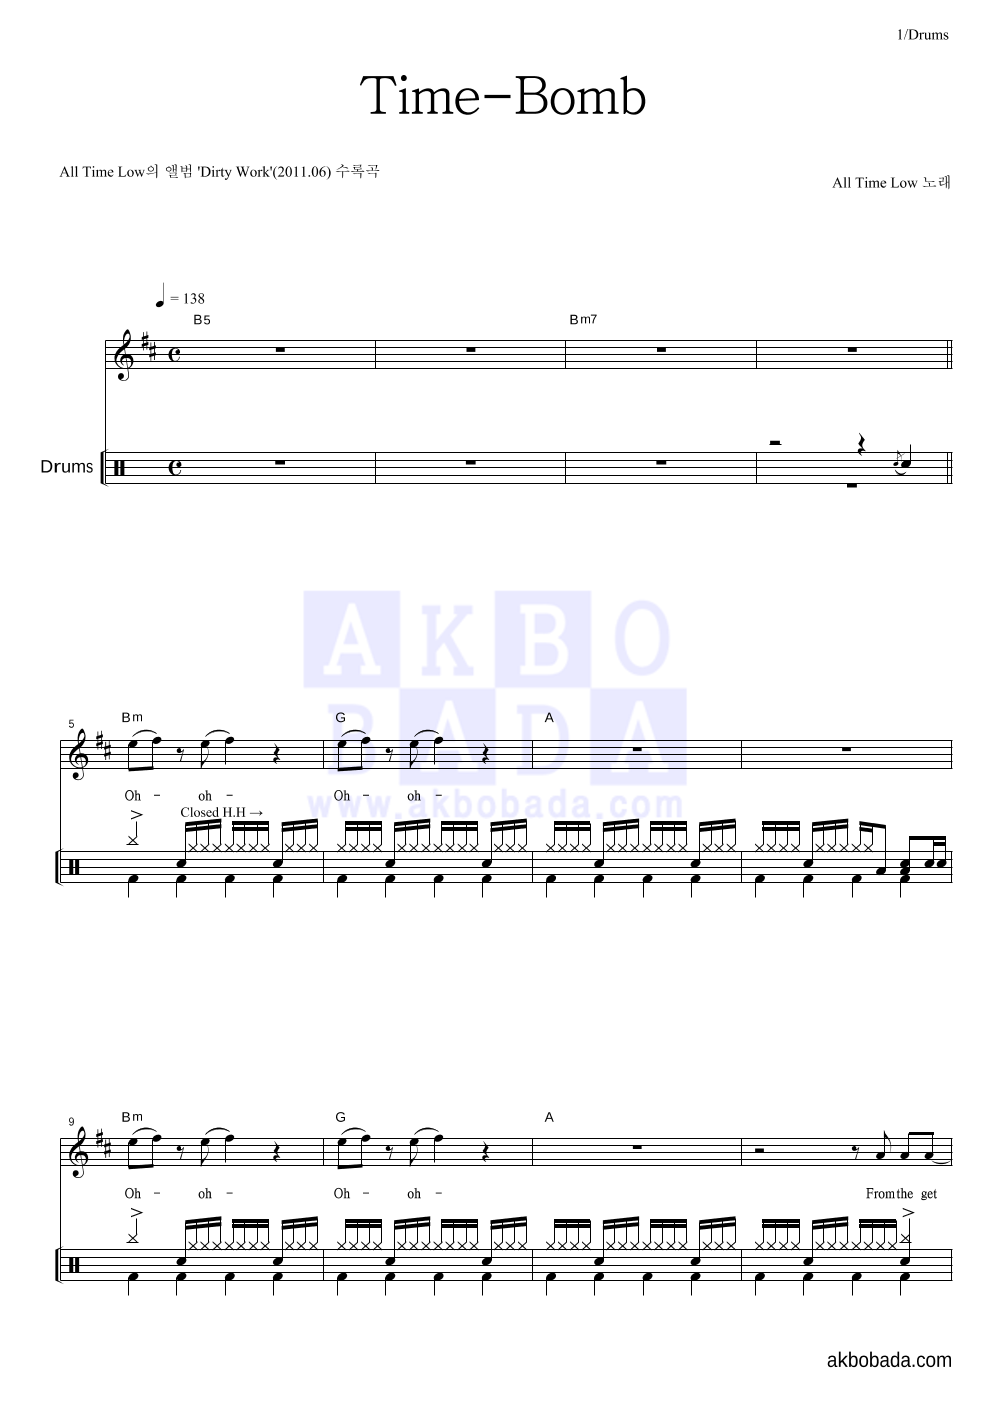 All time low time bomb piano sheet music